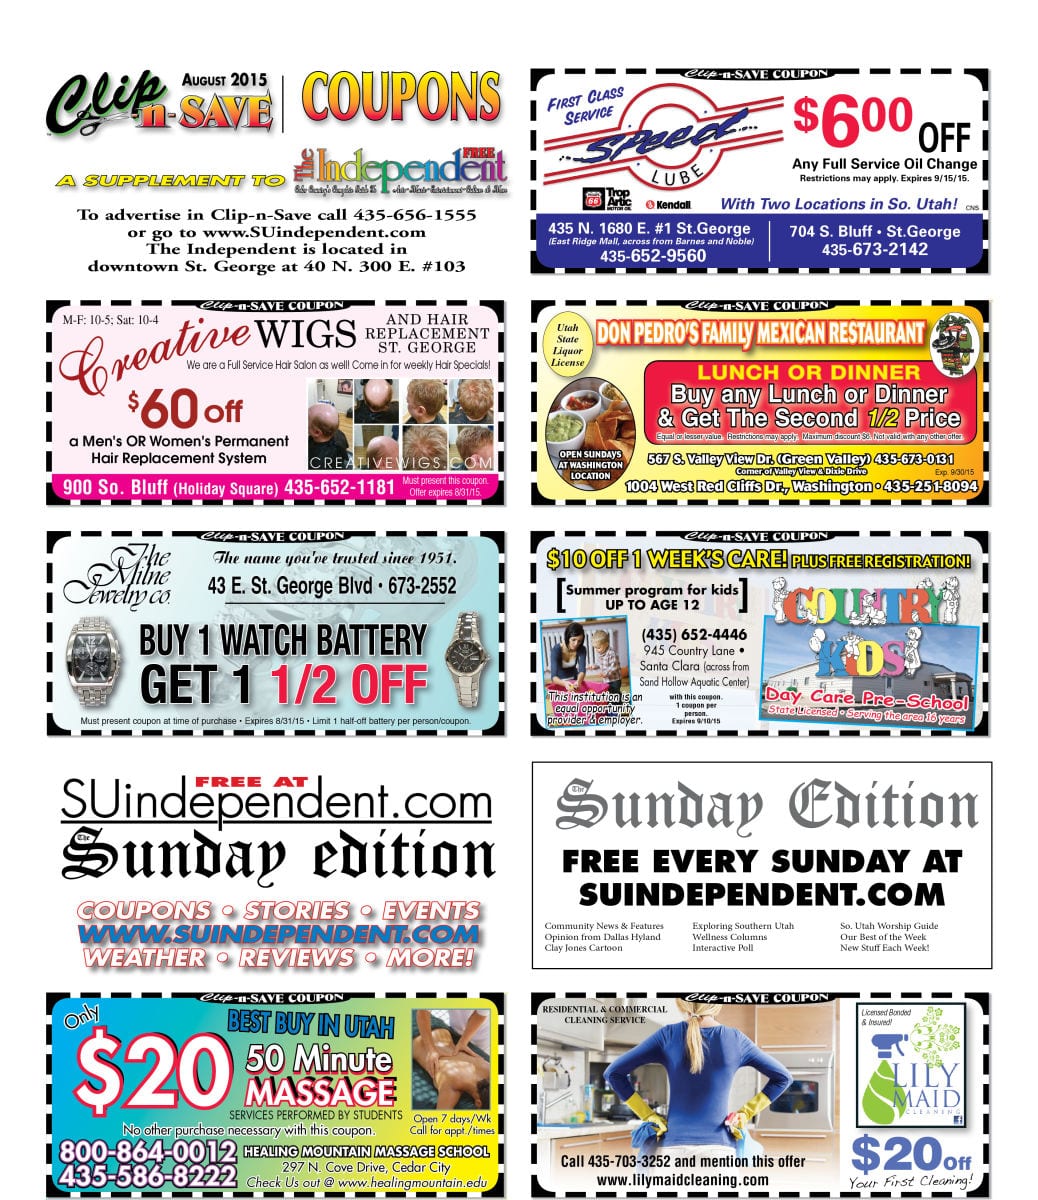 Clip-n-Save August 2015 Coupon Savings Book